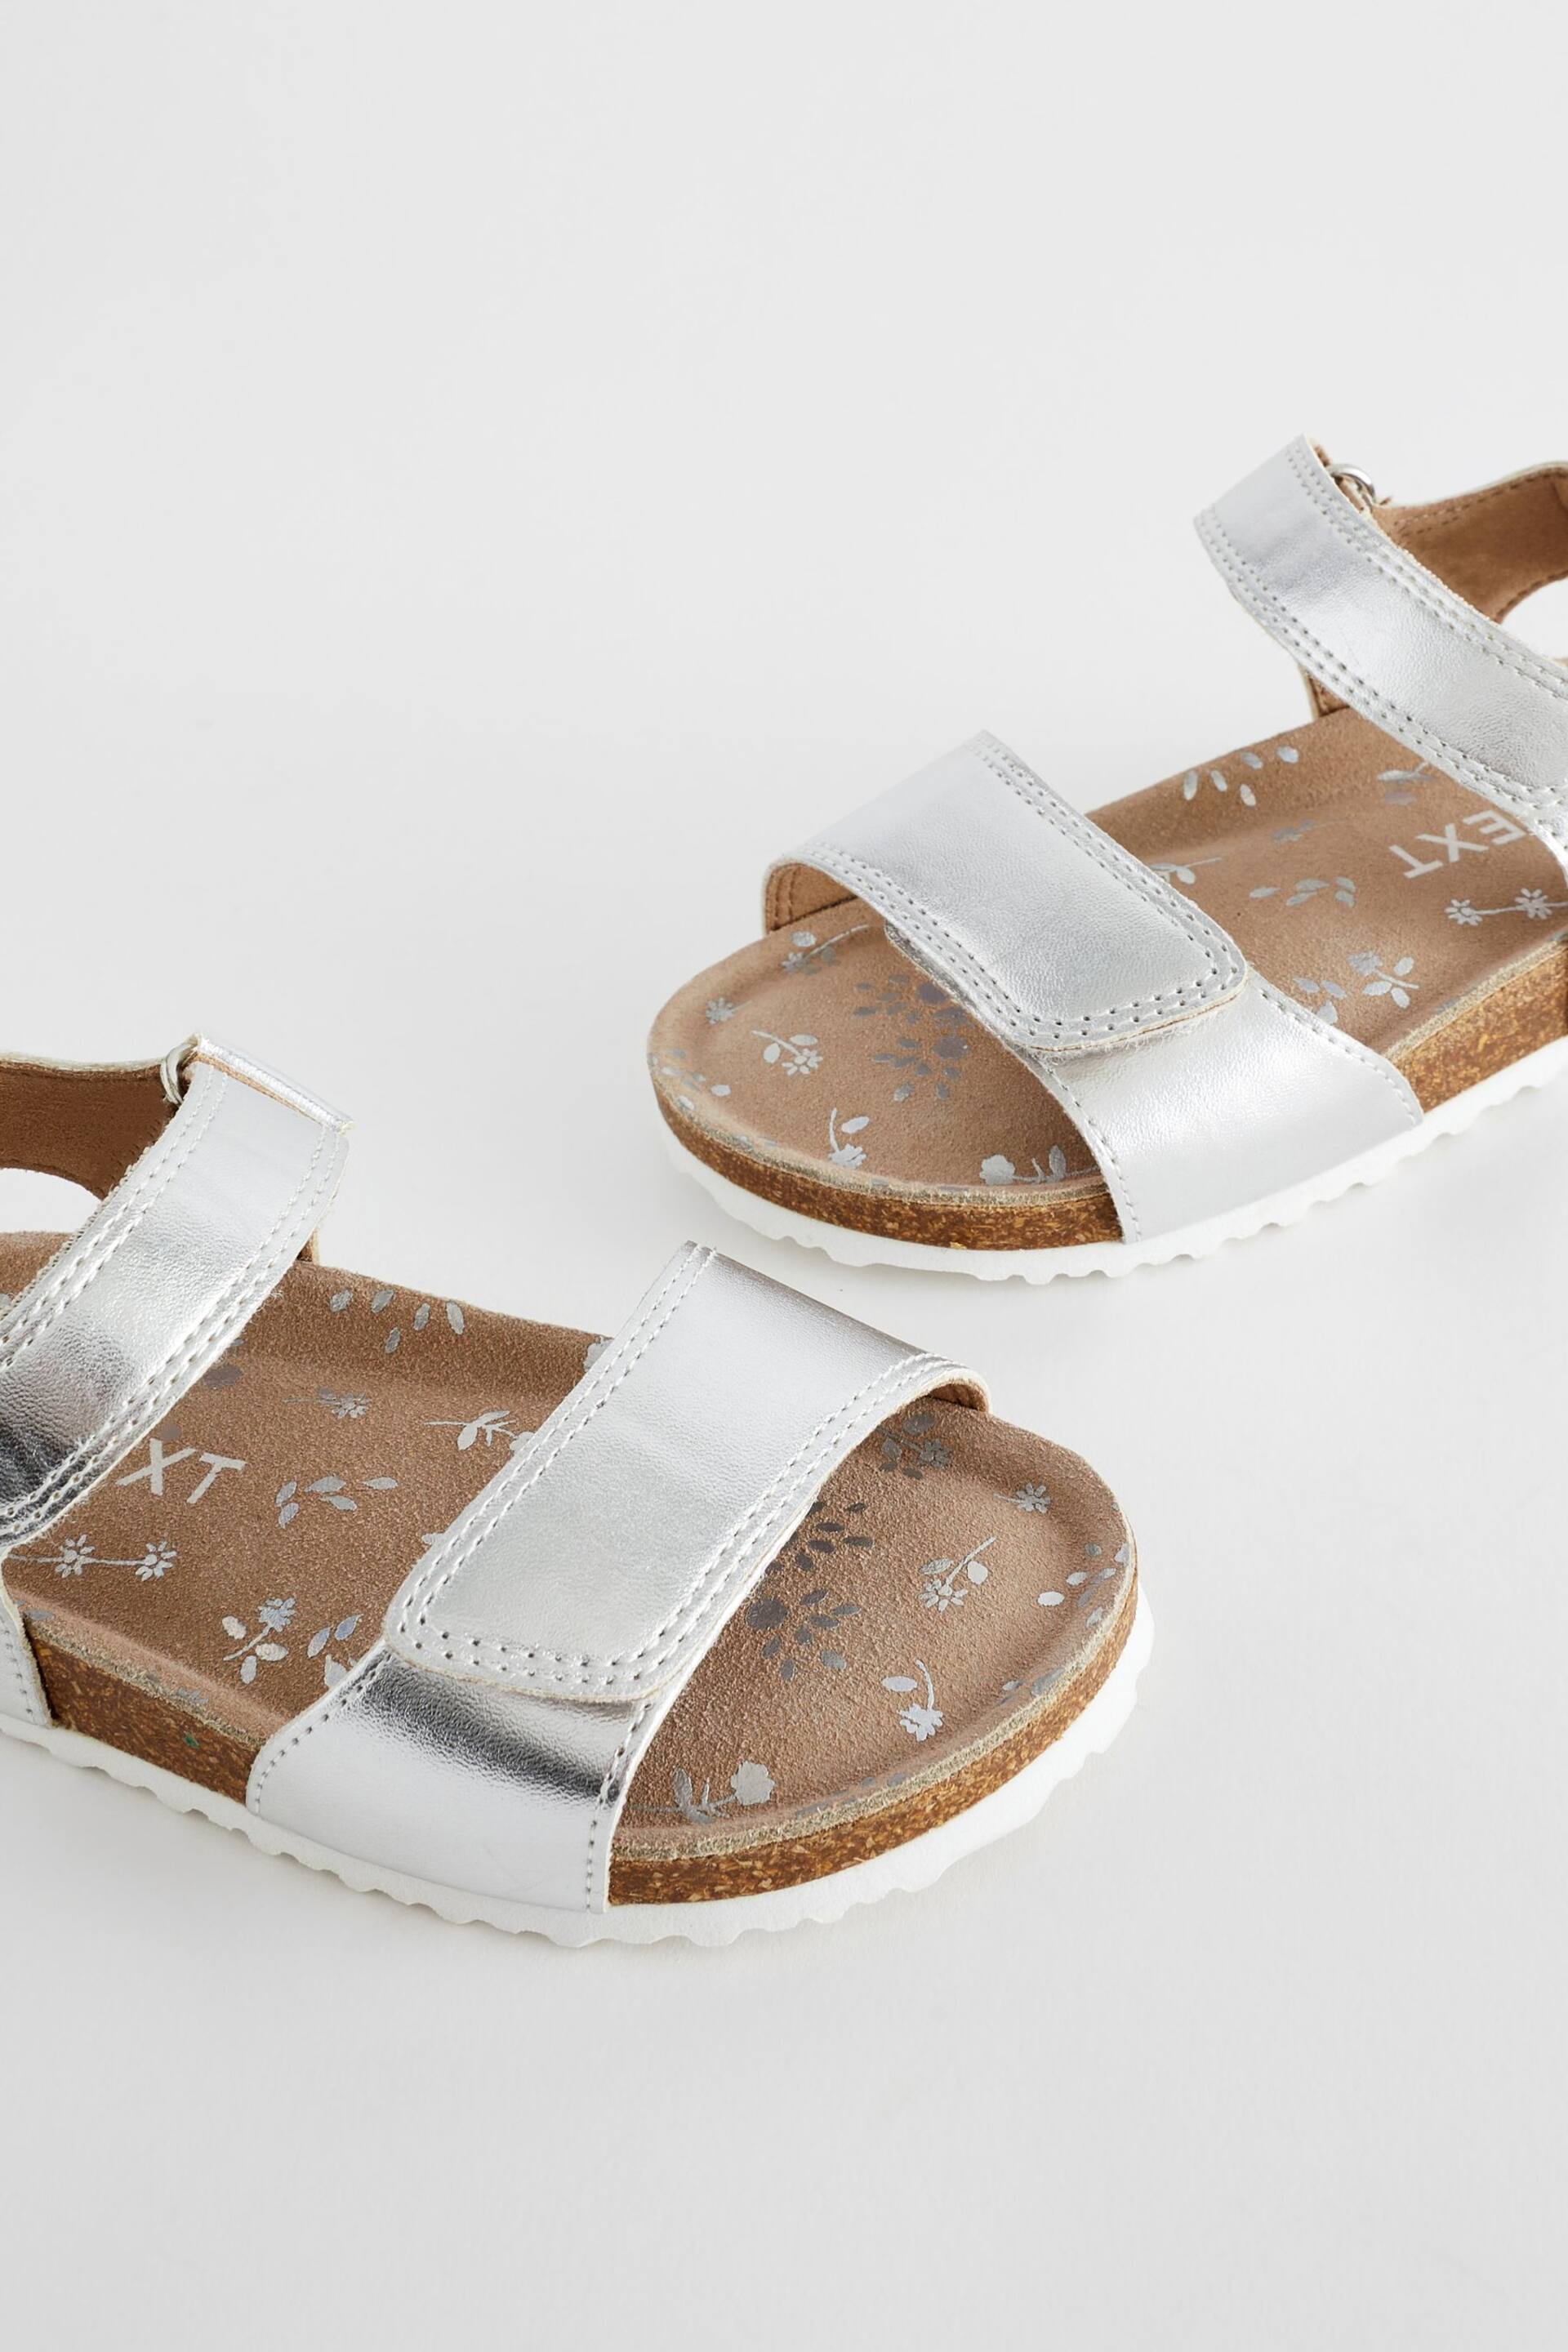 Silver Standard Fit (F) Leather Corkbed Sandals - Image 4 of 6